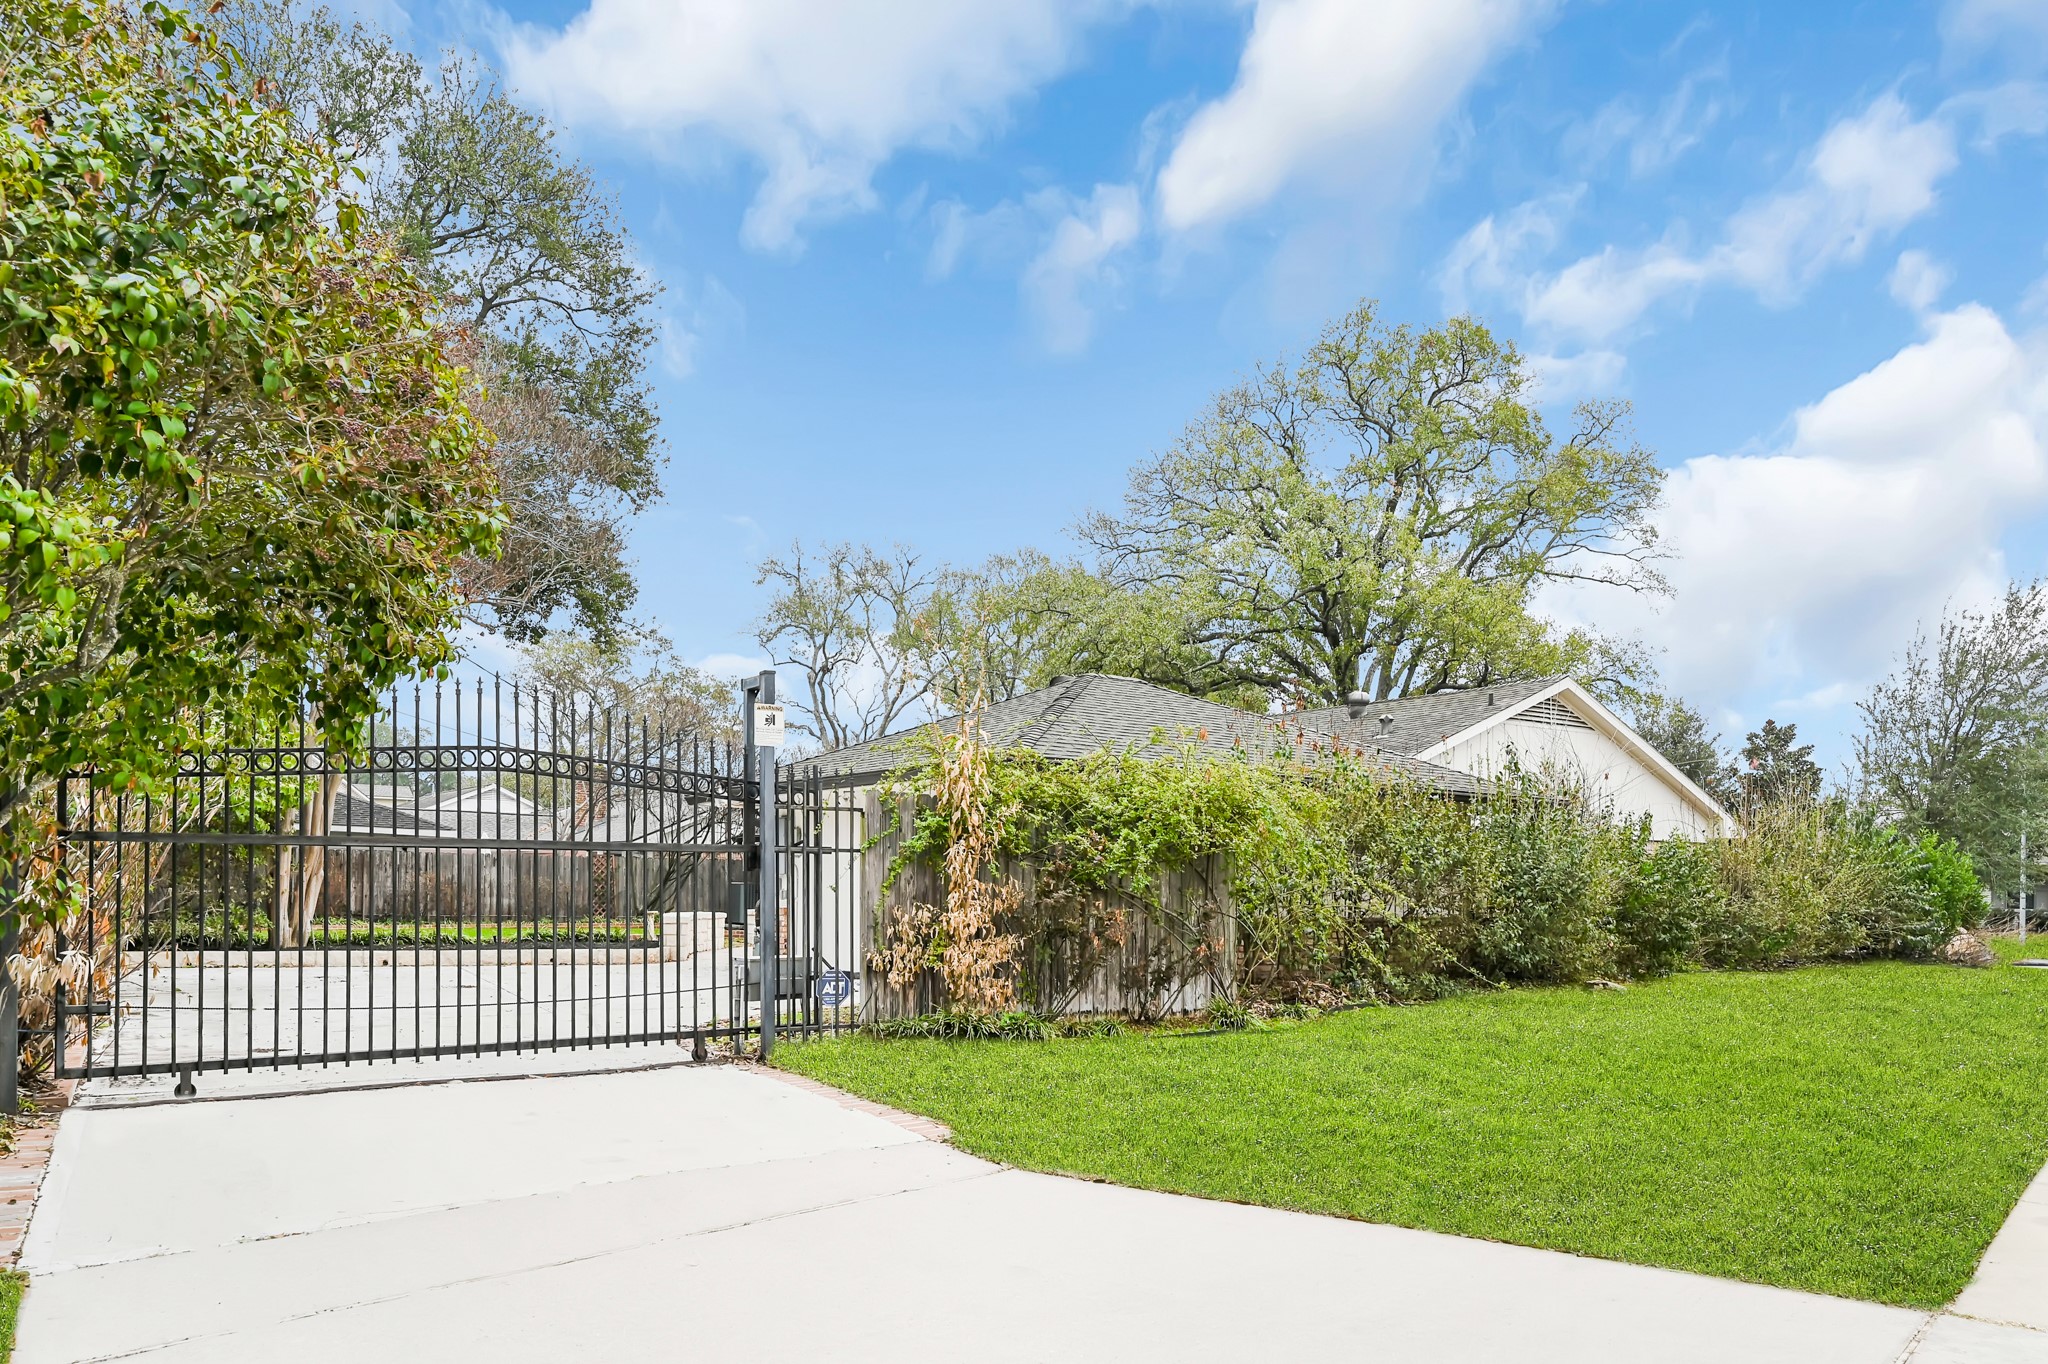 THE GATED DRIVEWAY IS LOCATED ON THE SIDE OF THE HOME.